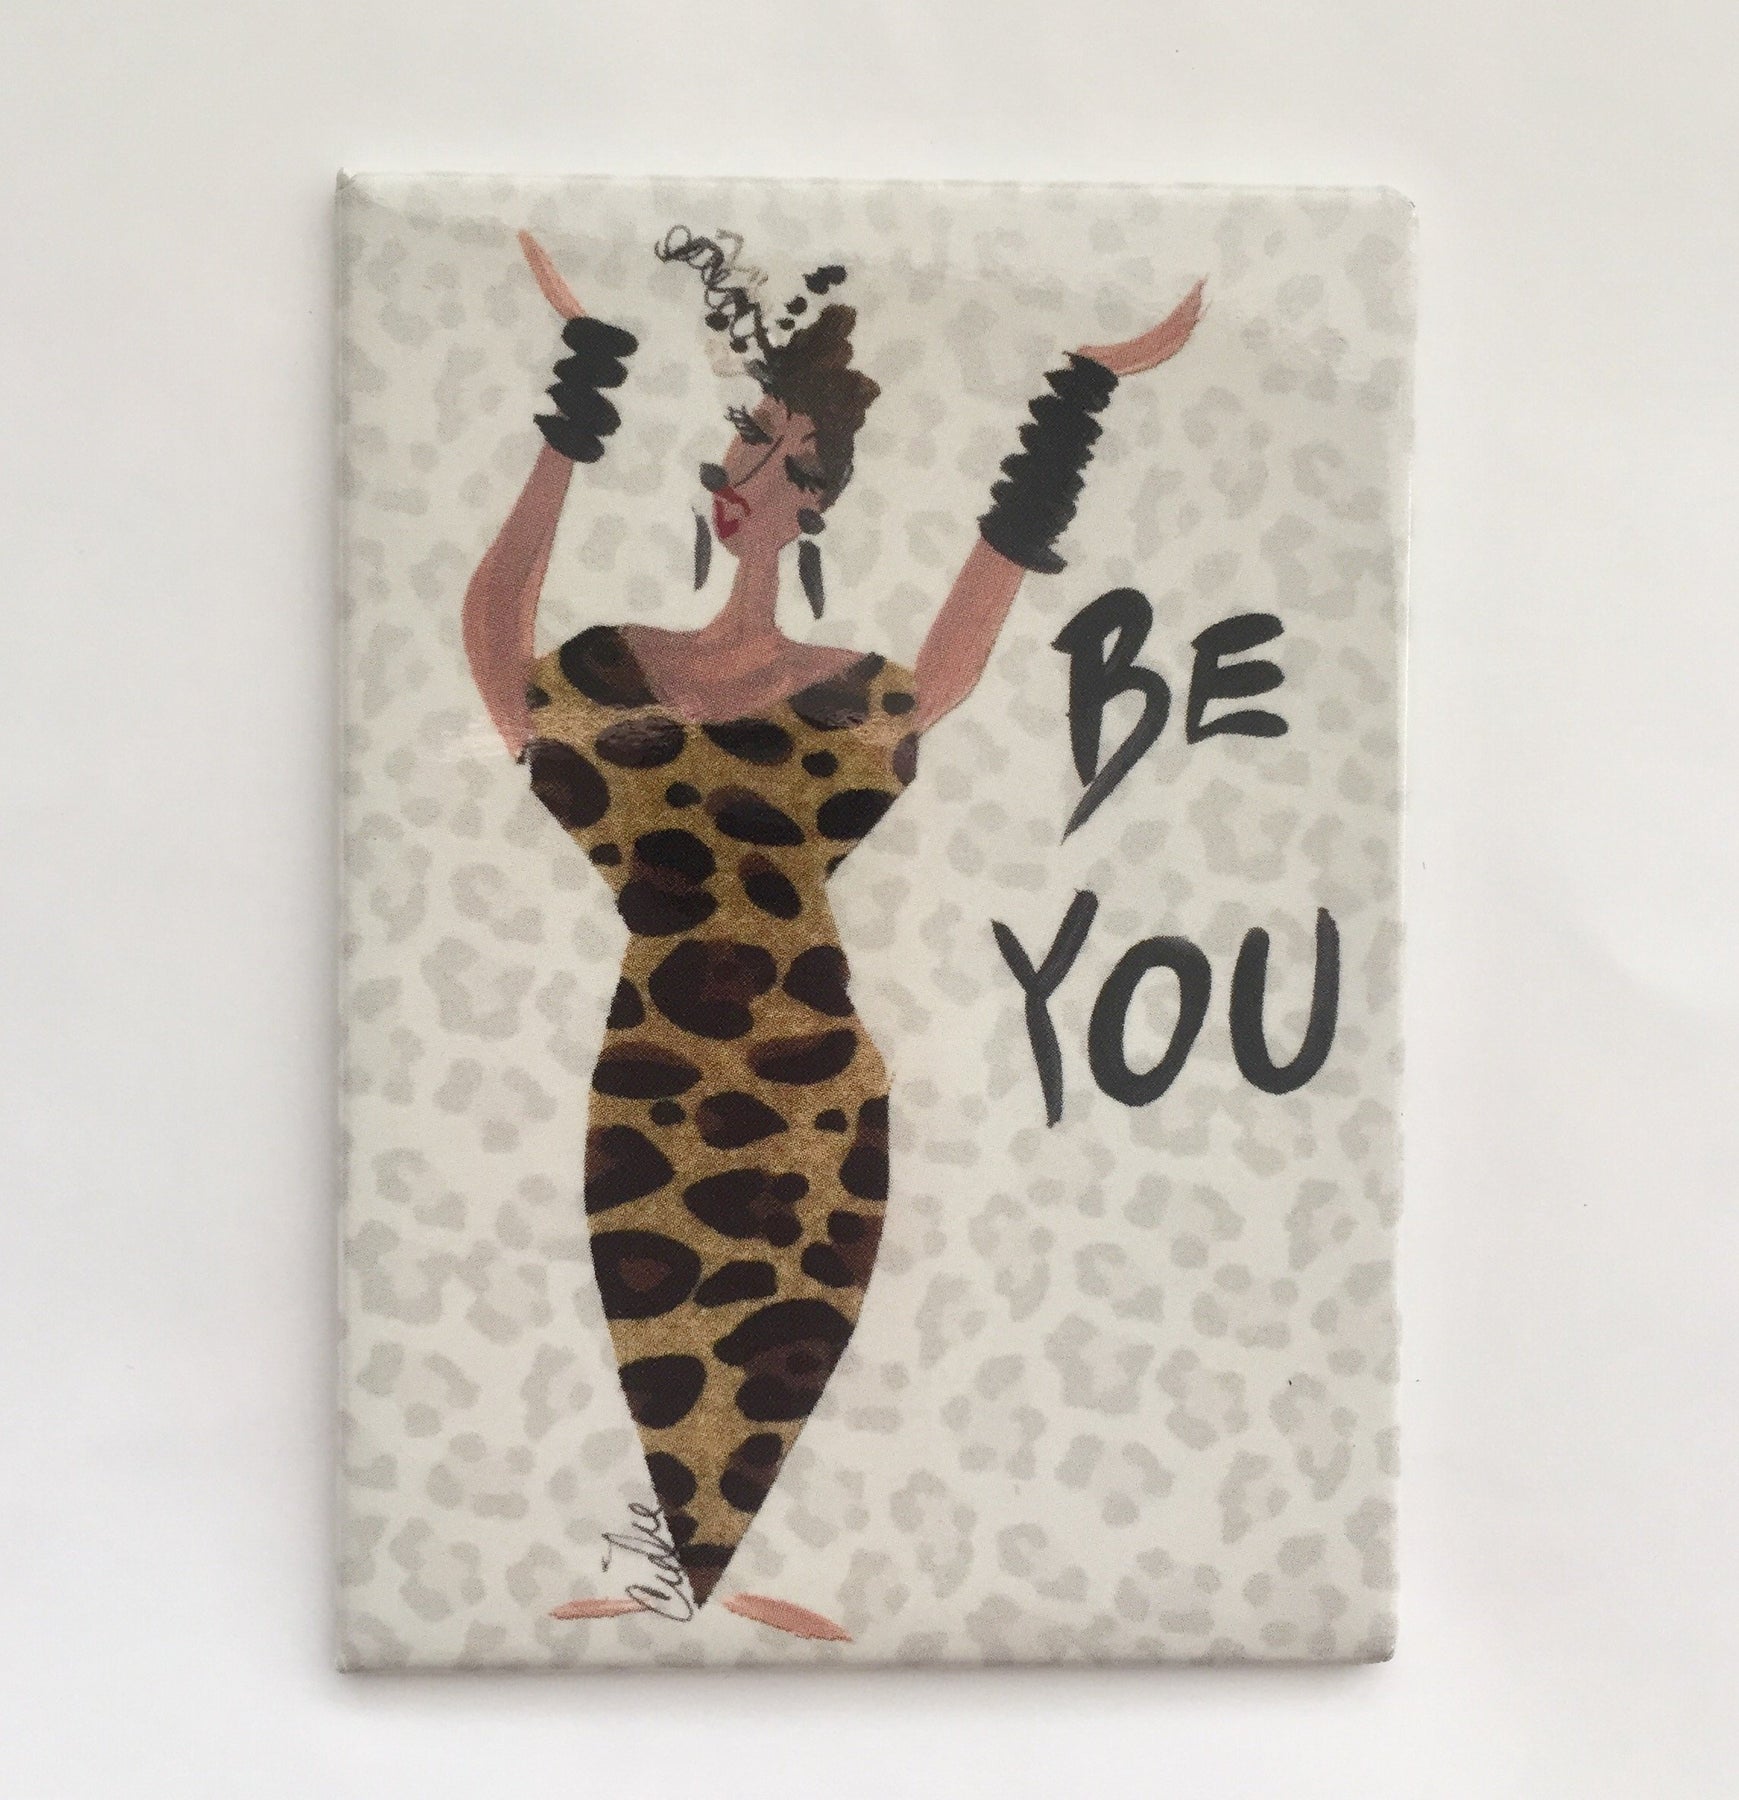 2 of 2: Be You: Cidne Wallace Magnet by Shades of Color